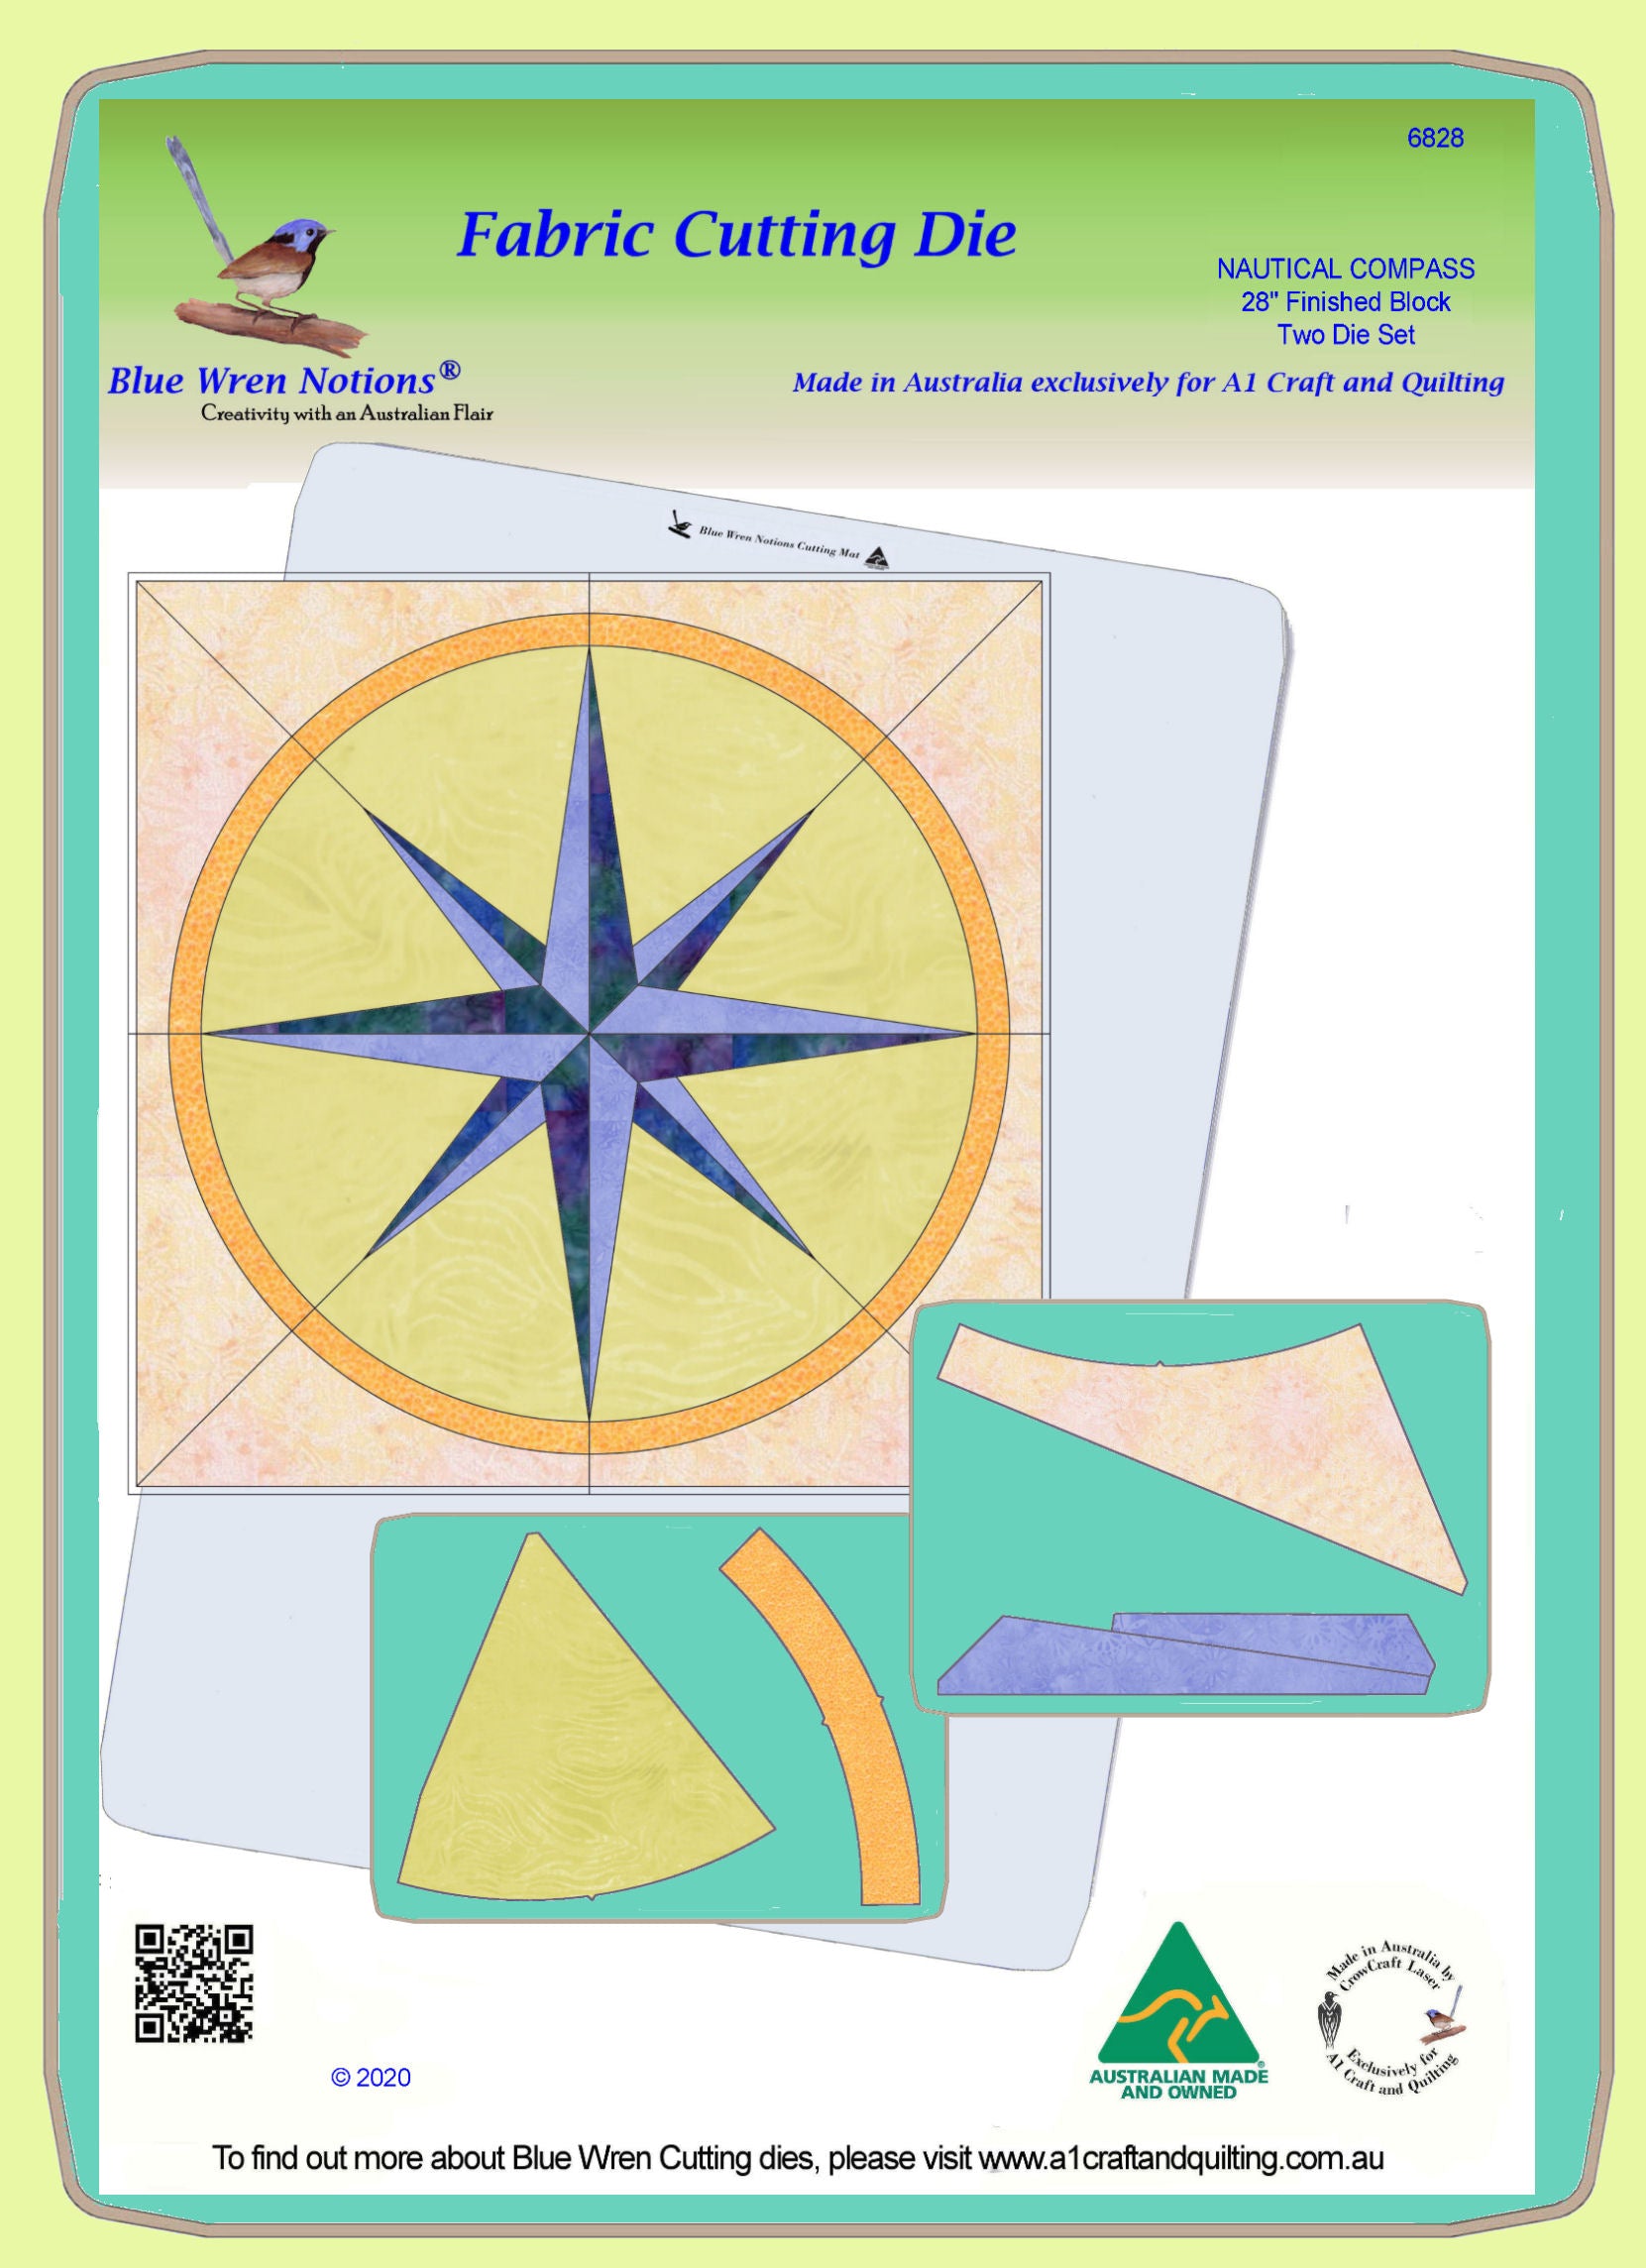 Nautical Compass - 6828 - makes an 28" block - Two die Set - pattern instructions and mat included